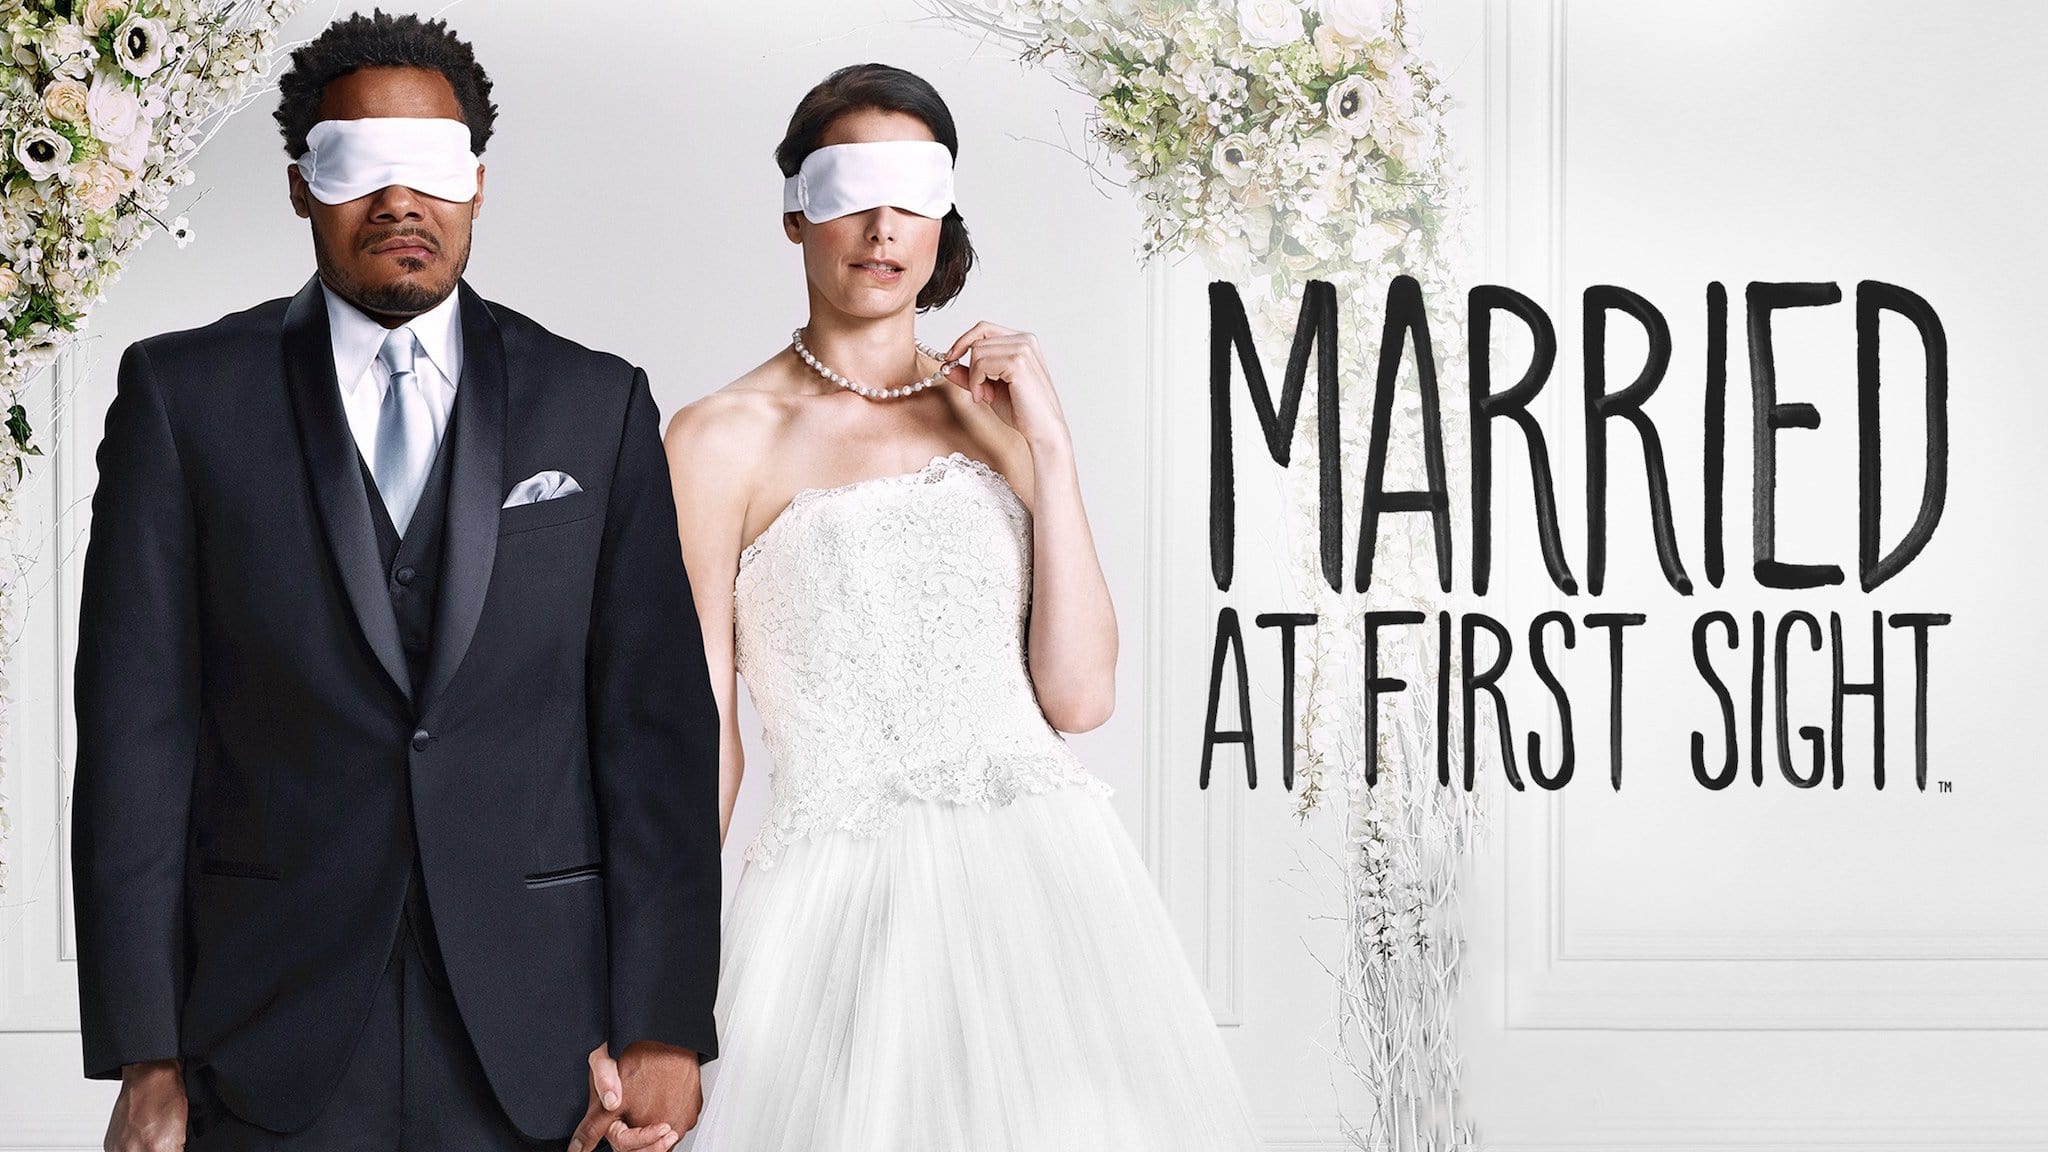 Married at First Sight UK - Season 8